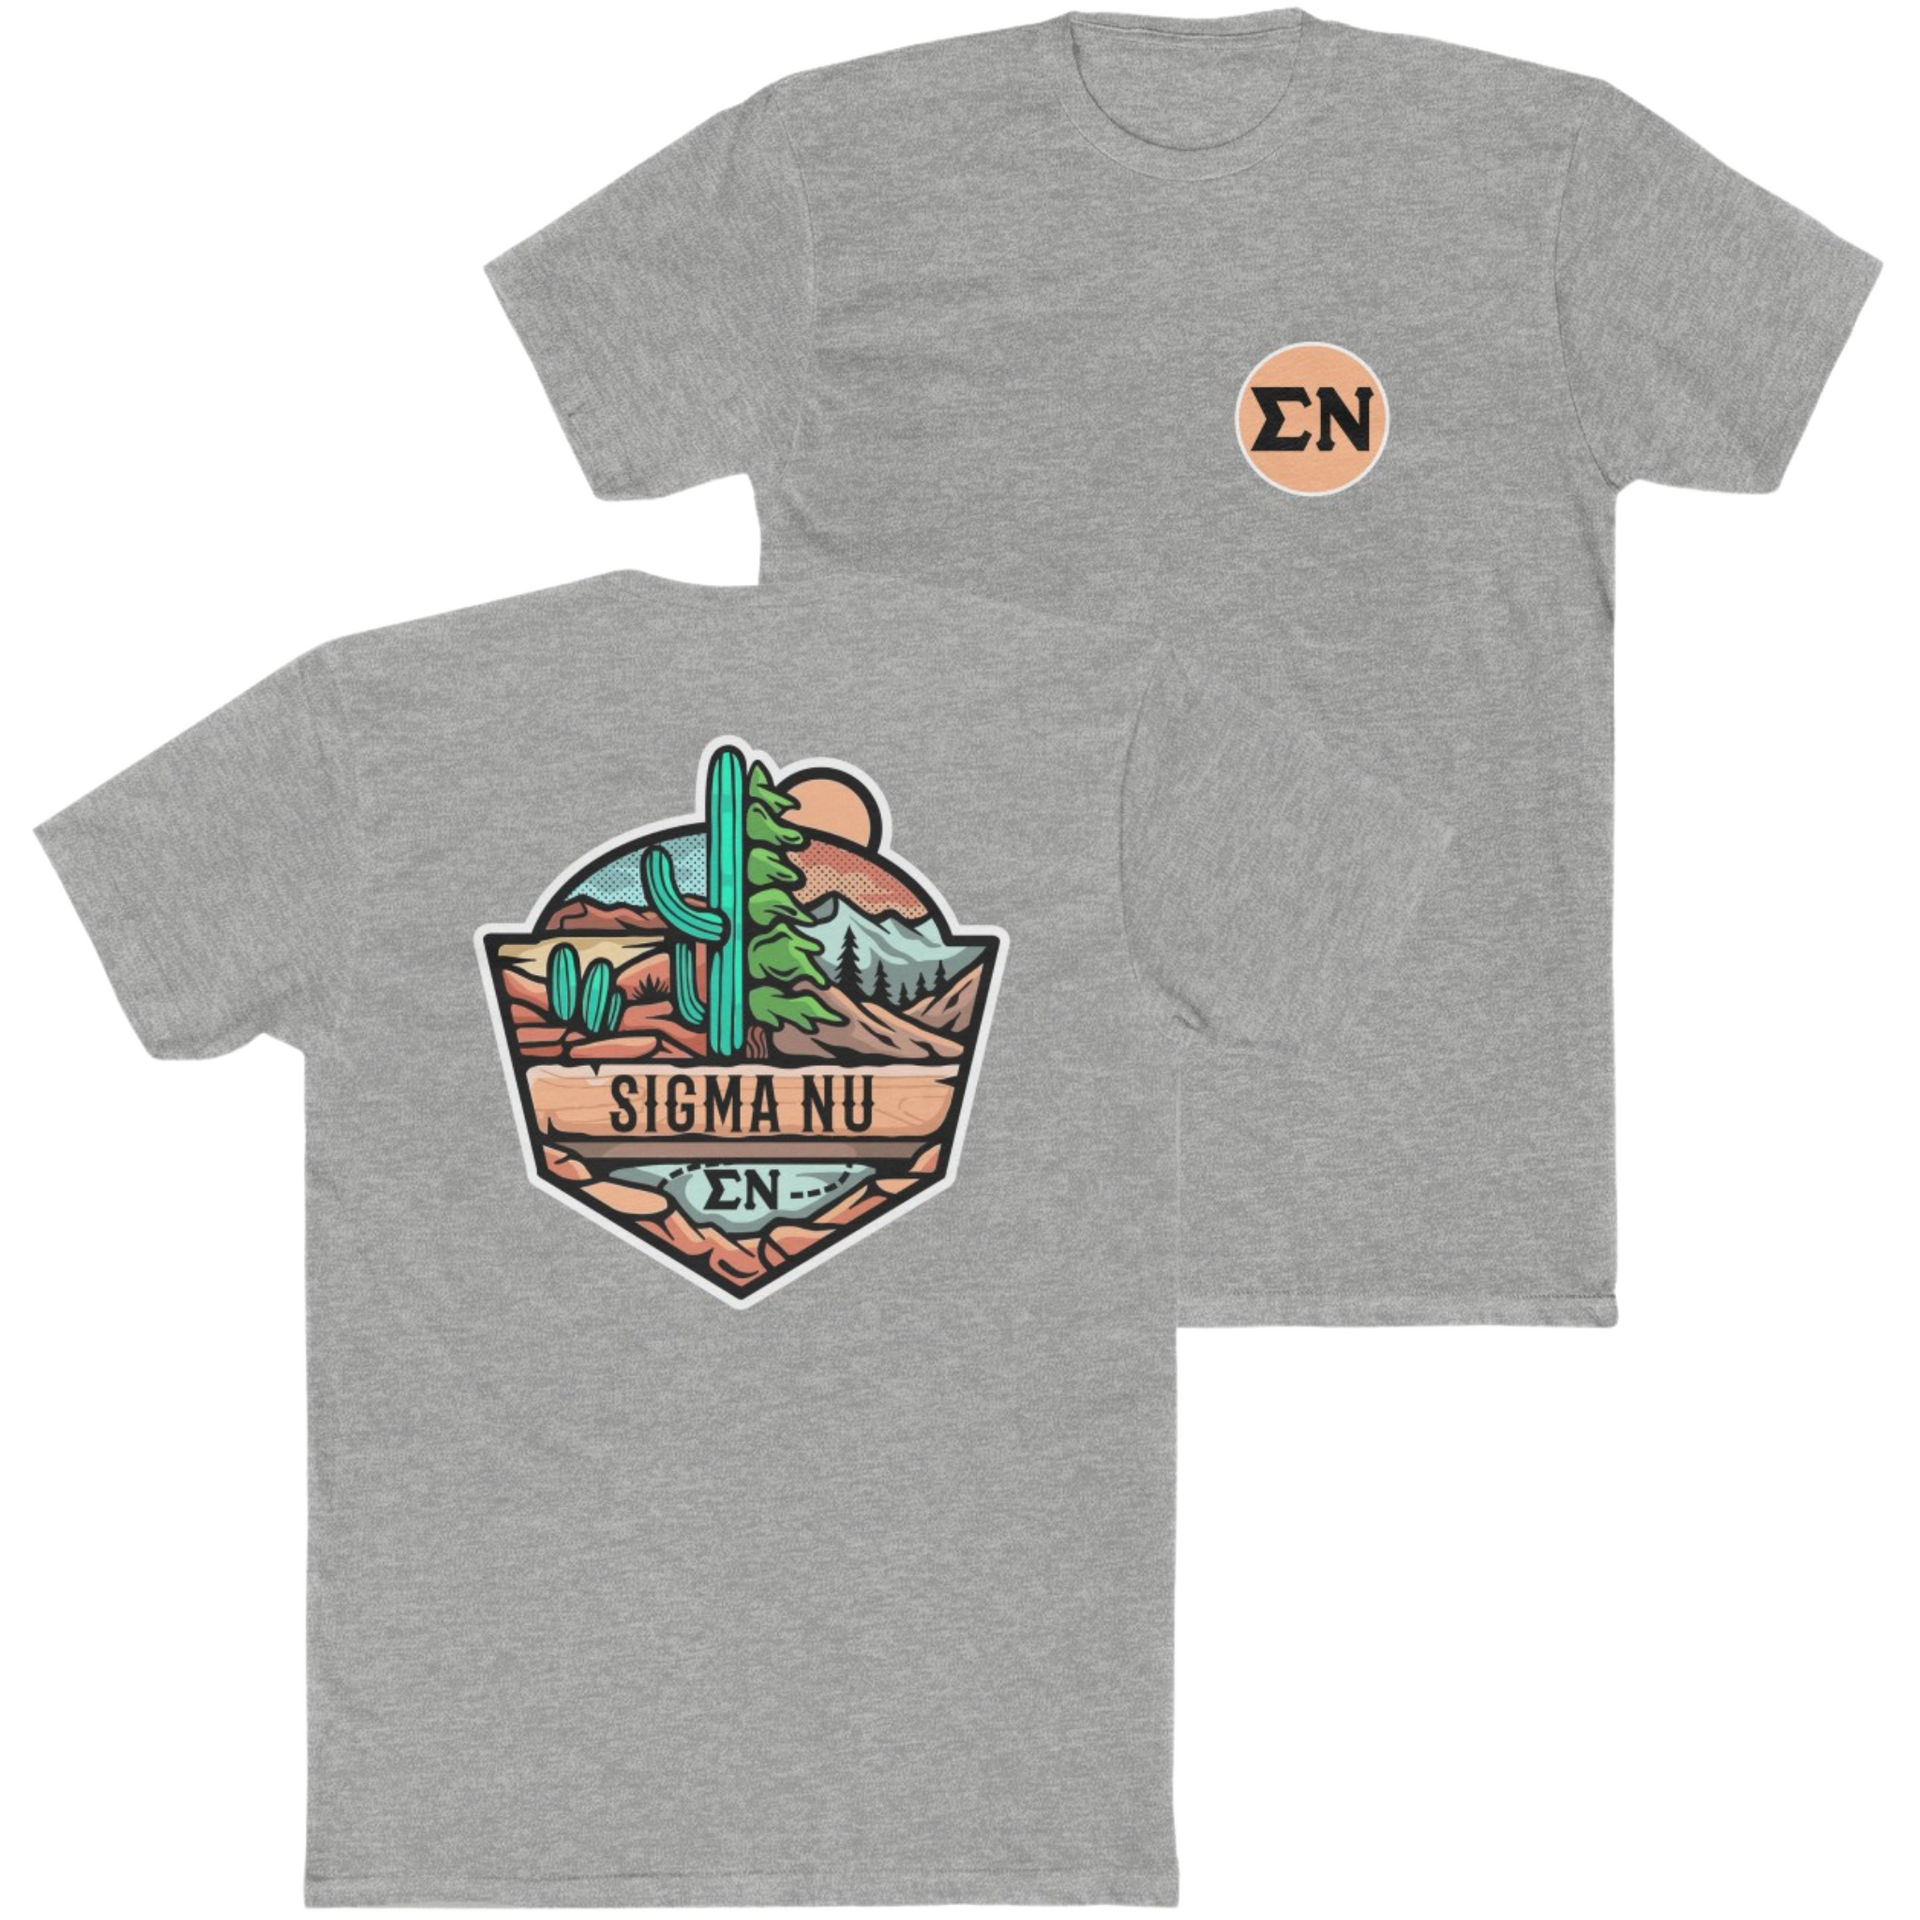 Grey Sigma Nu Graphic T-Shirt | Desert Mountains | Sigma Nu Clothing, Apparel and Merchandise